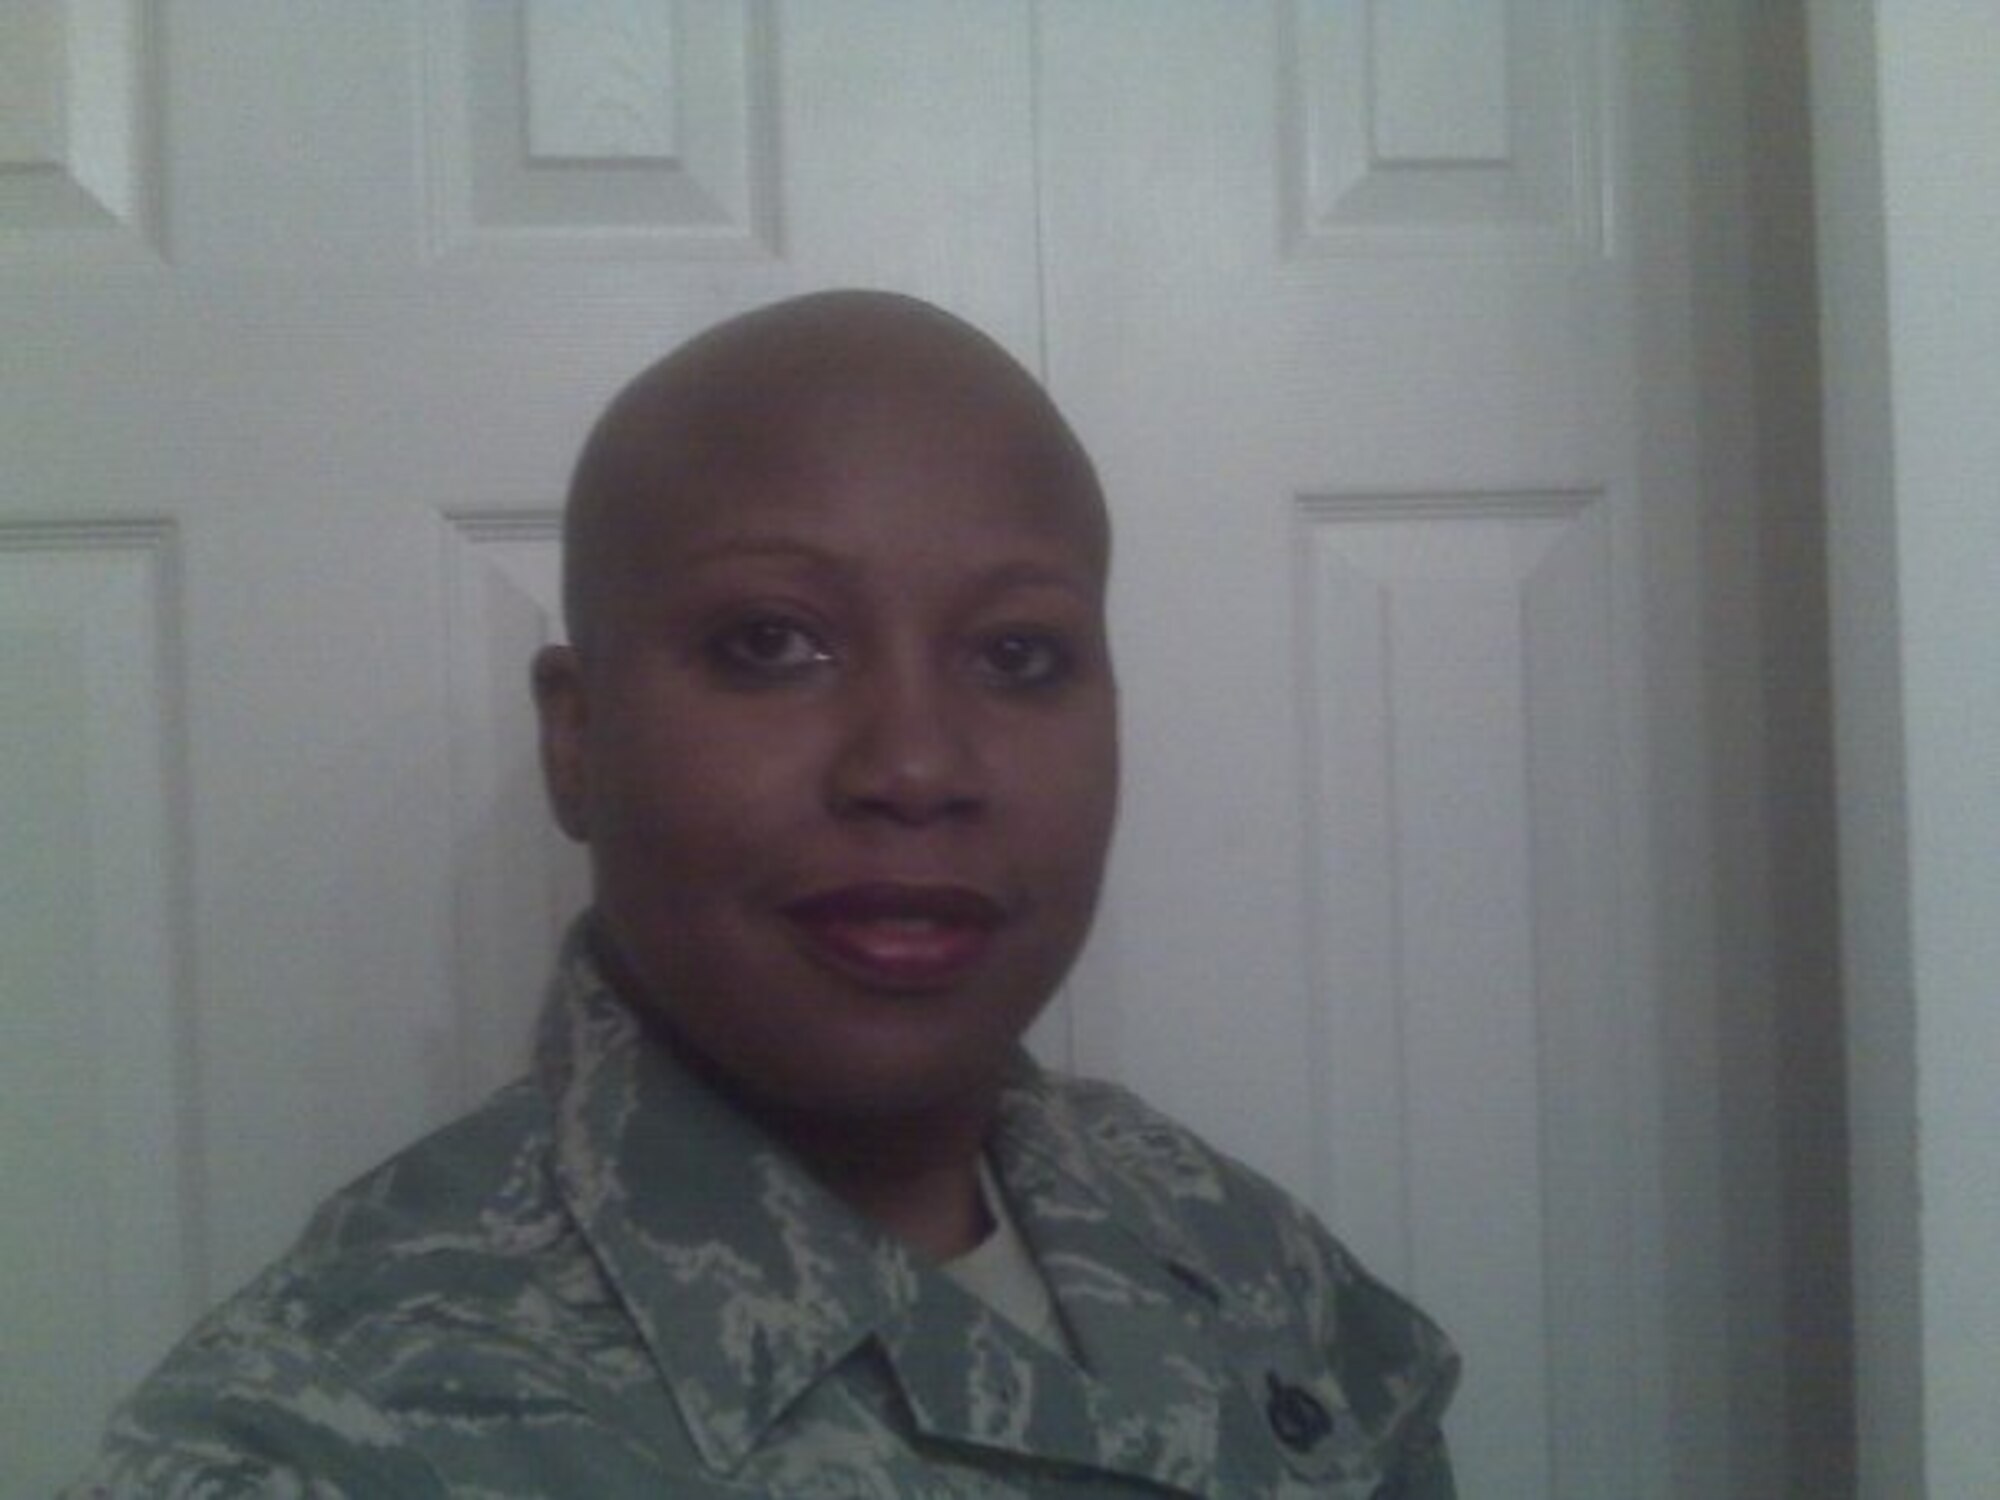 The results of Chief Master Sgt. Yolanda Jennings’ chemotherapy treatment, when she had just taken her wig off for the first time at work. (Courtesy photo)